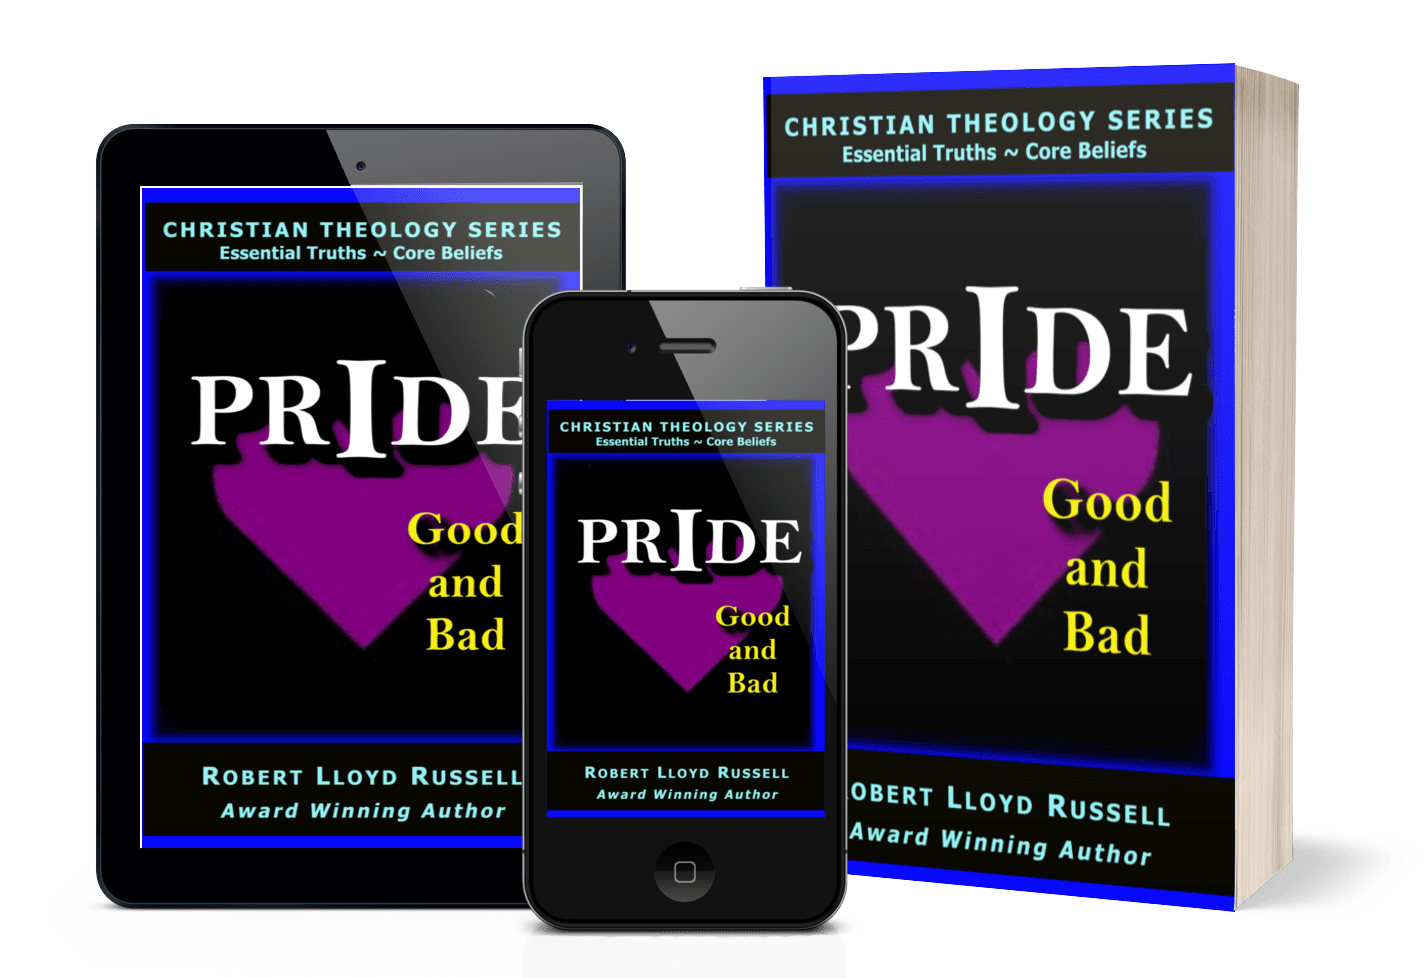 Book cover - PRIDE, Good and Bad.